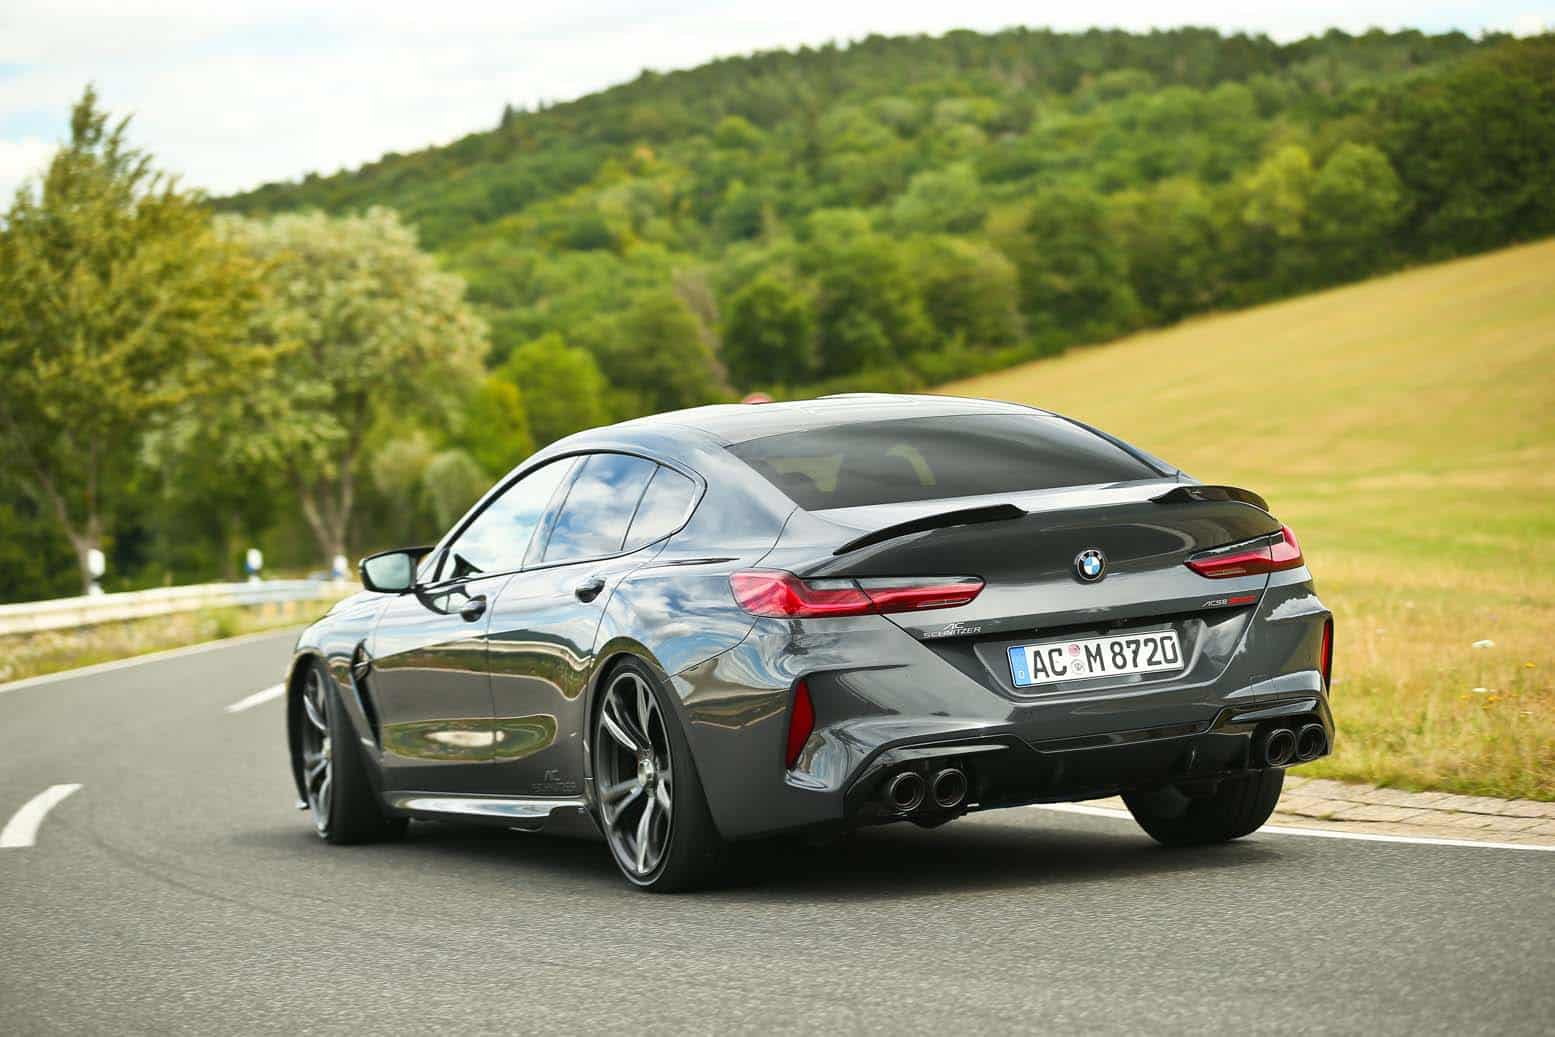 Enjoy the BMW M8 Competition with almost 100 extra hp and a more aggressive aesthetic